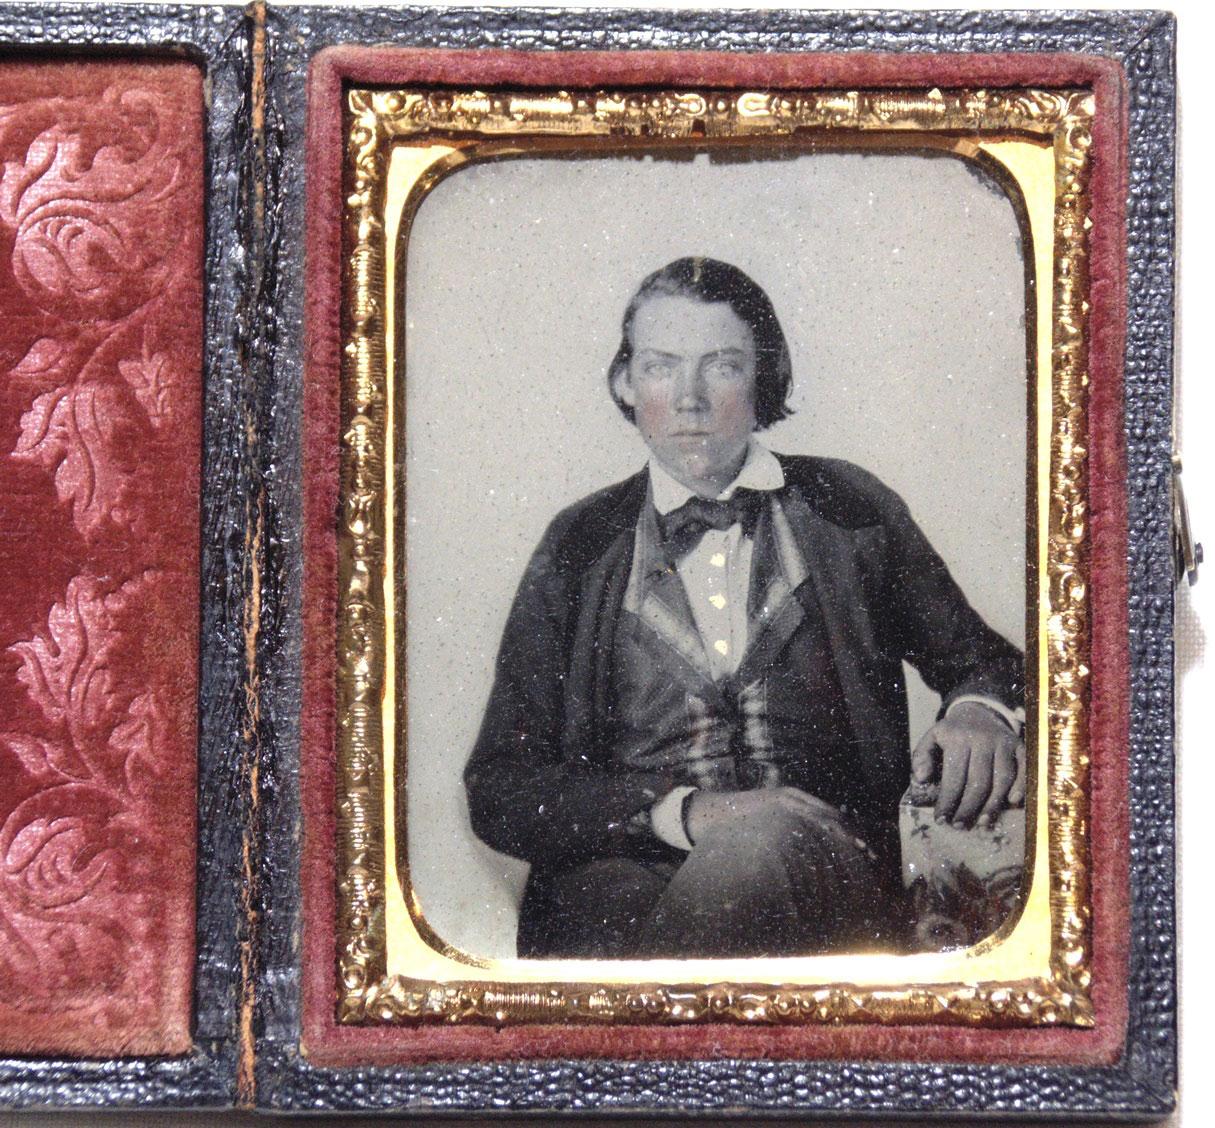 Photo Claimed to be Jesse James Surfaces | Art & Object